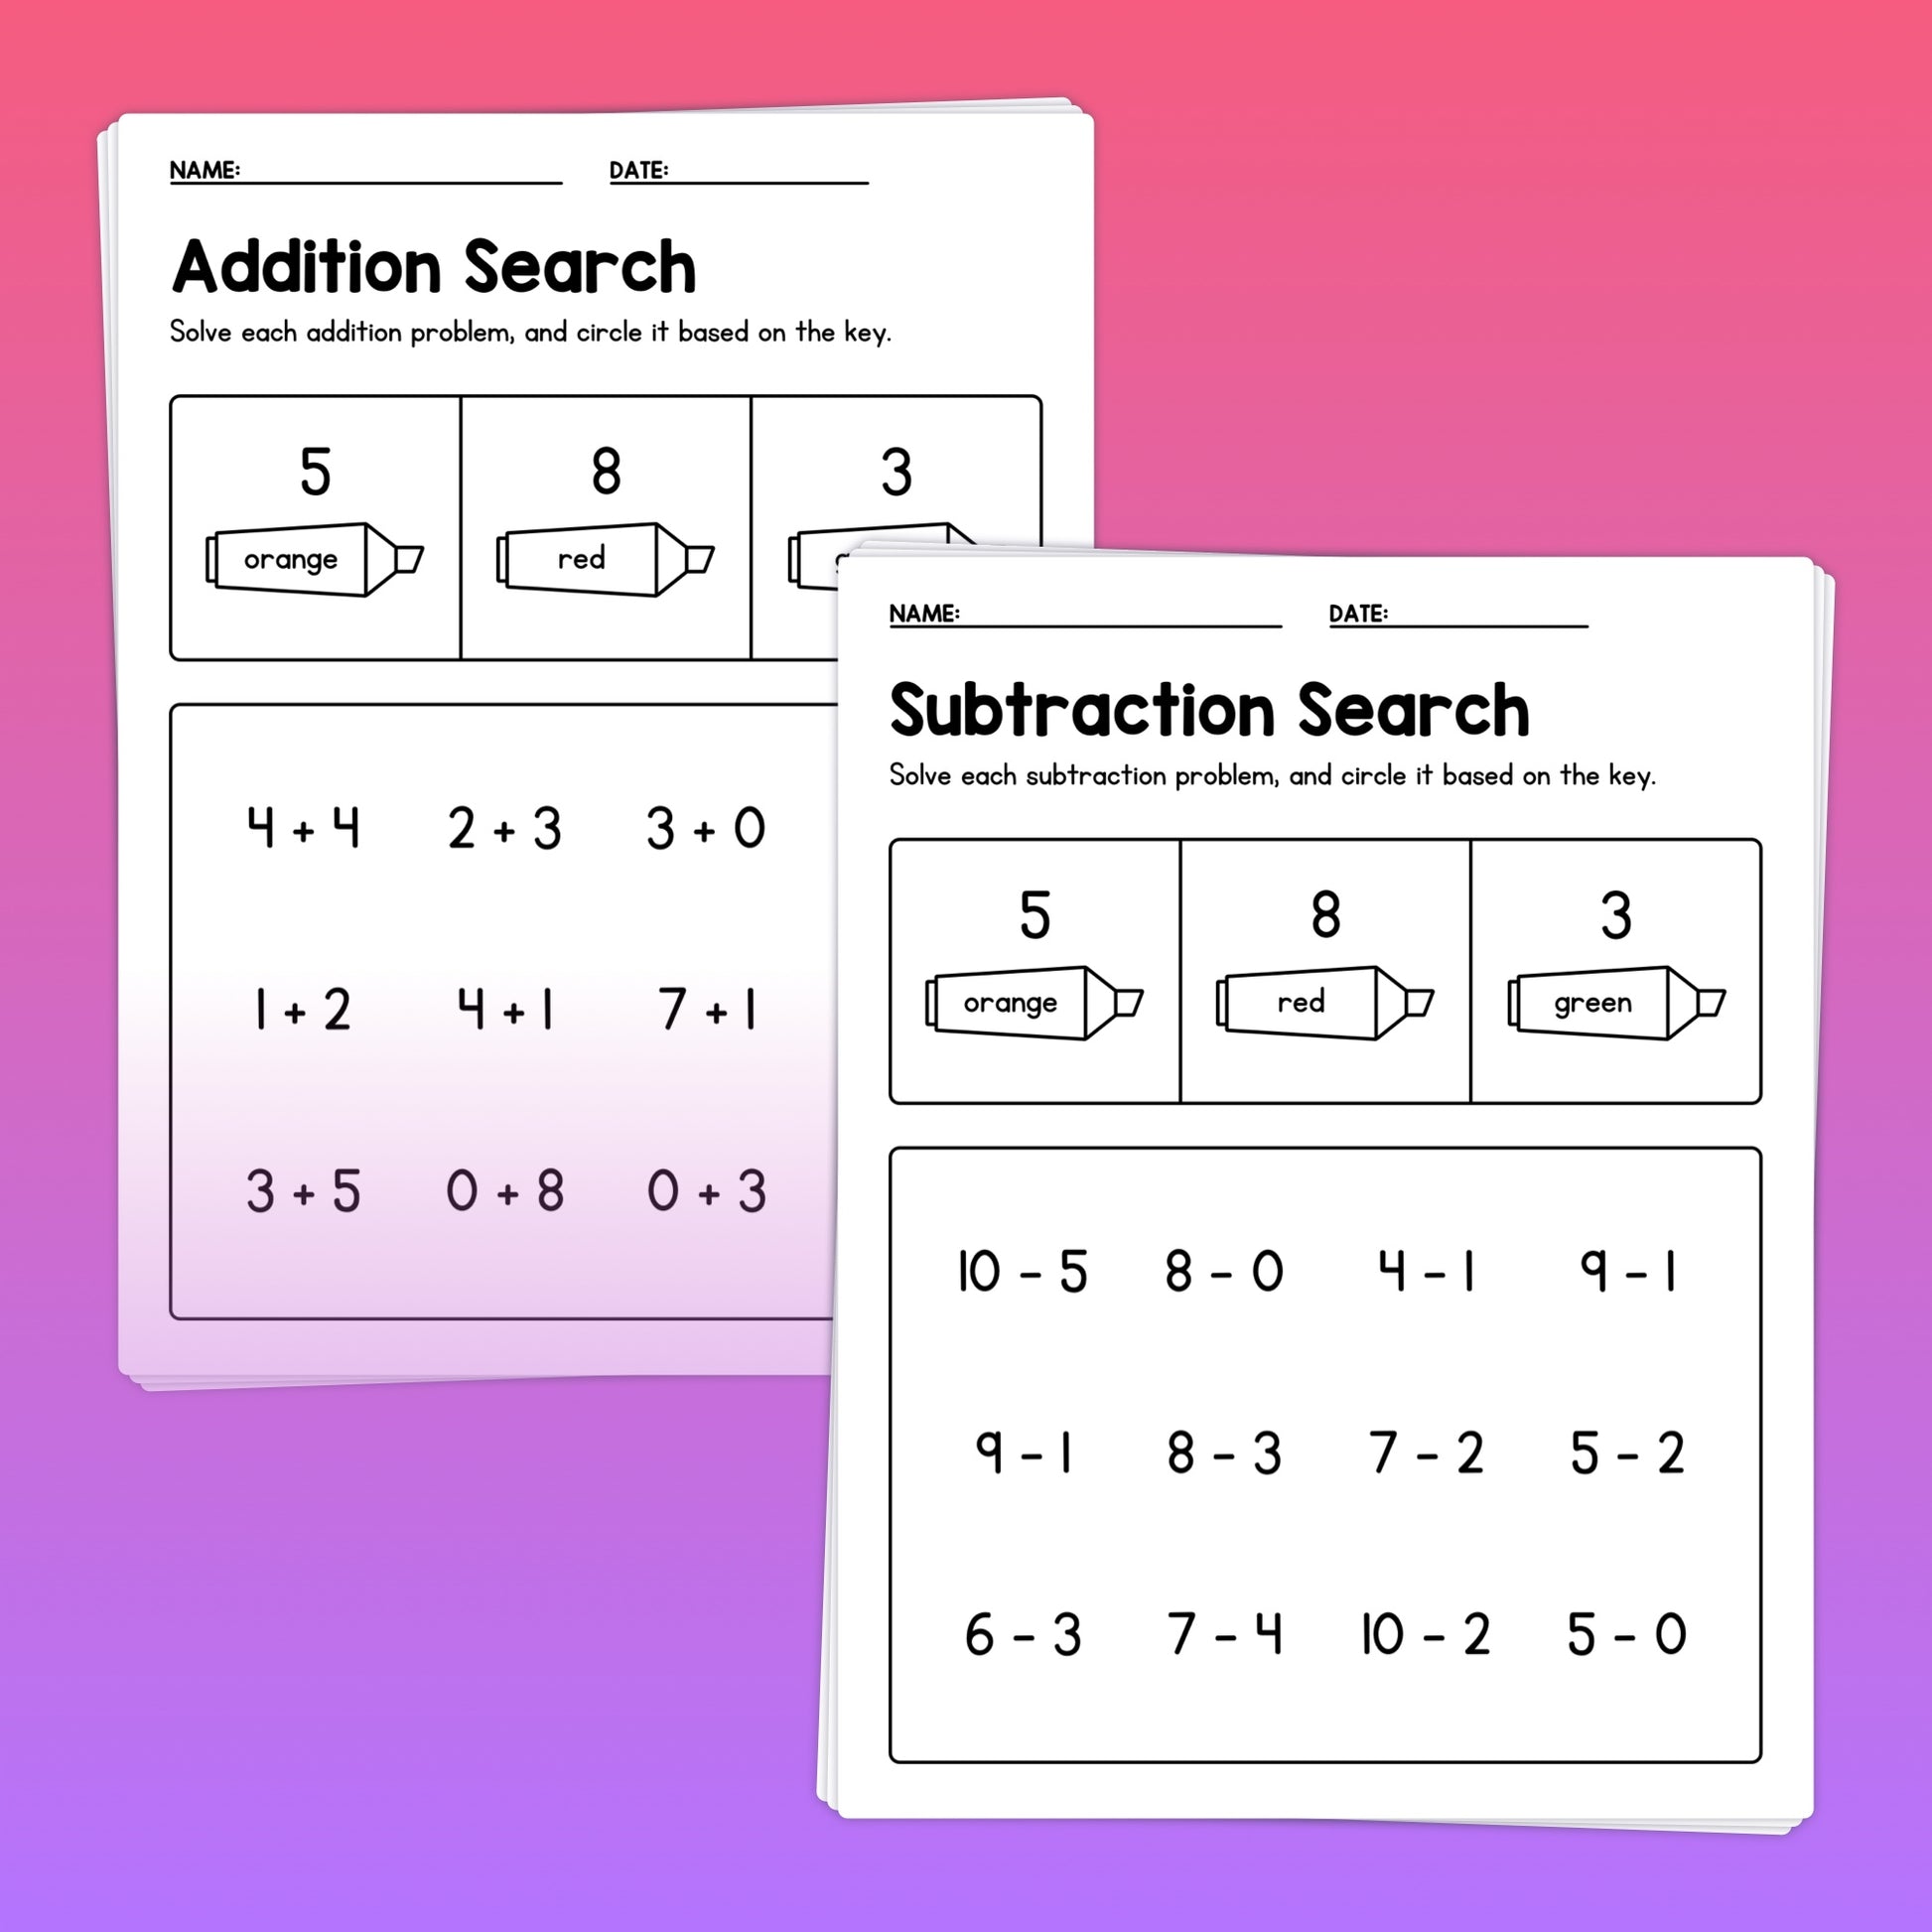 Addition and subtraction search activities